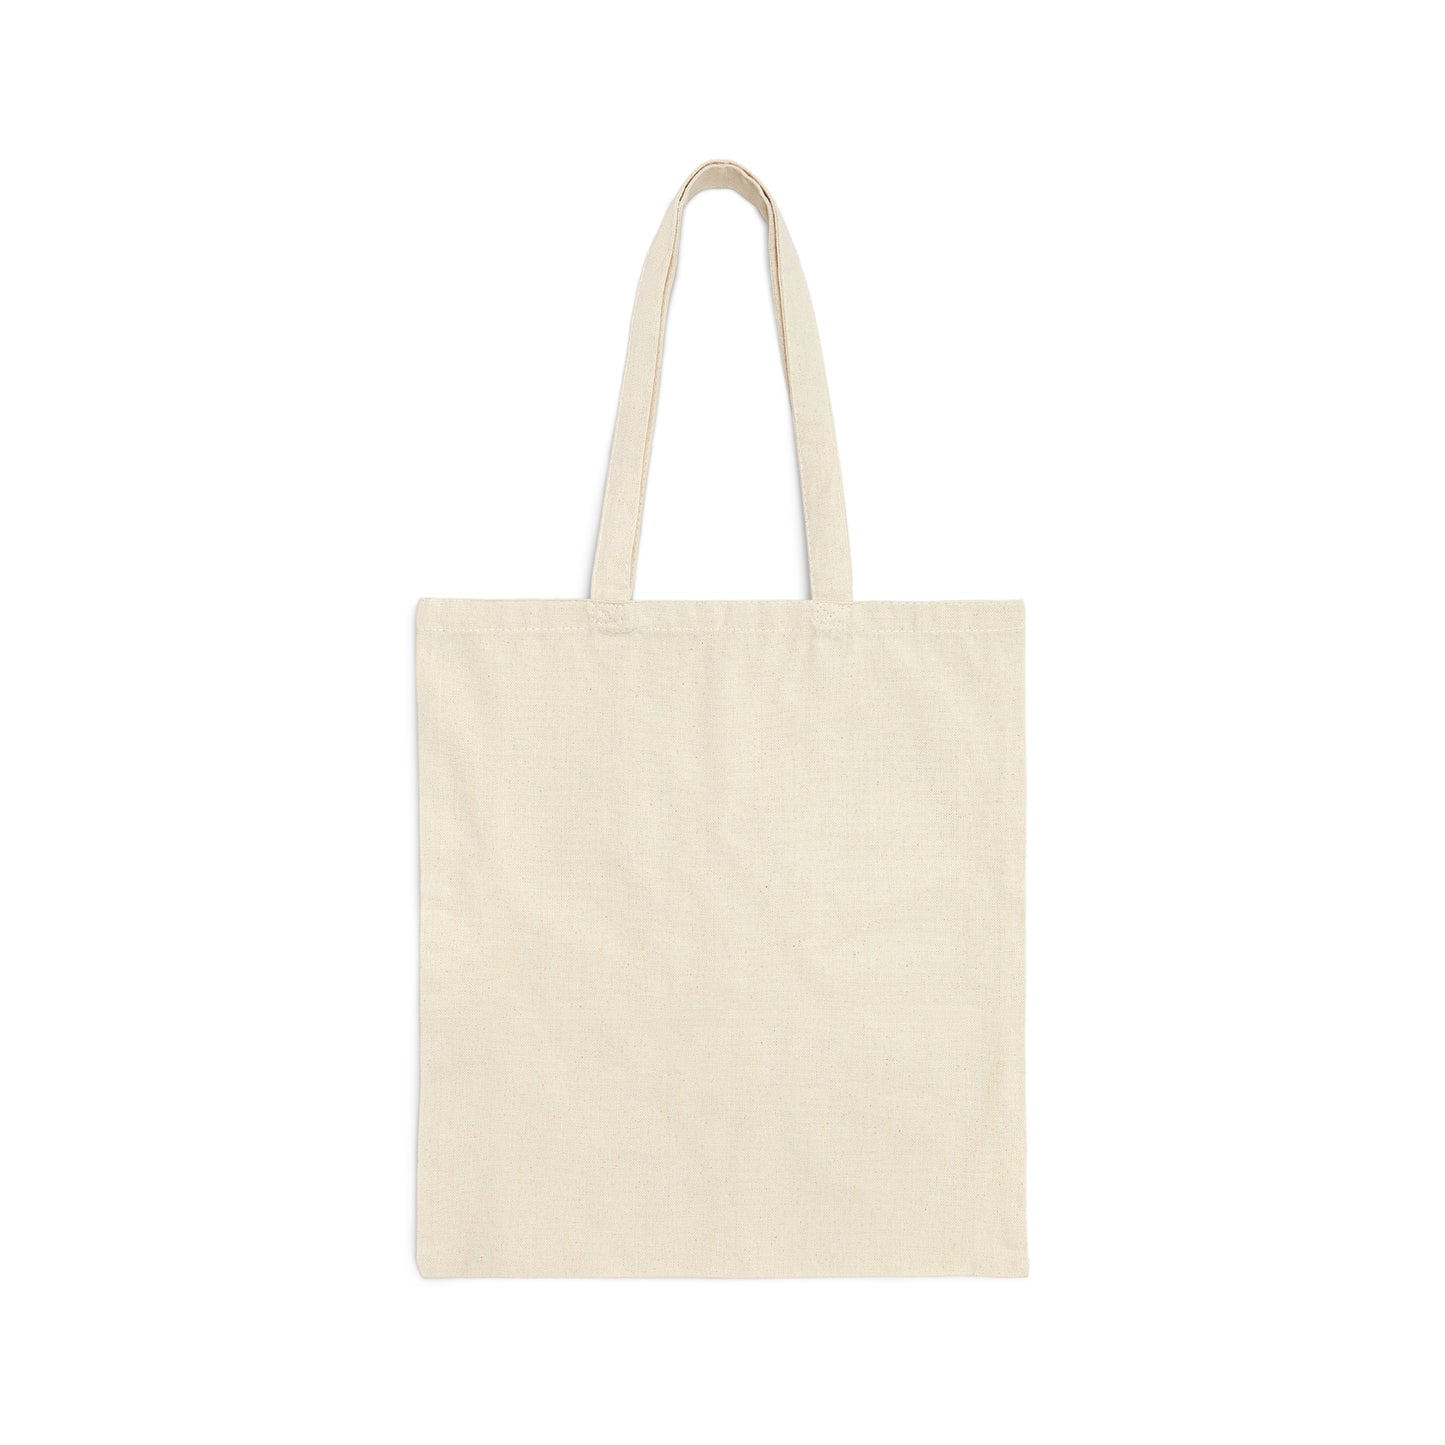 Hello Winter! Holidays are coming! Christmas Gift Canvas Shopping Cotton Tote Bag